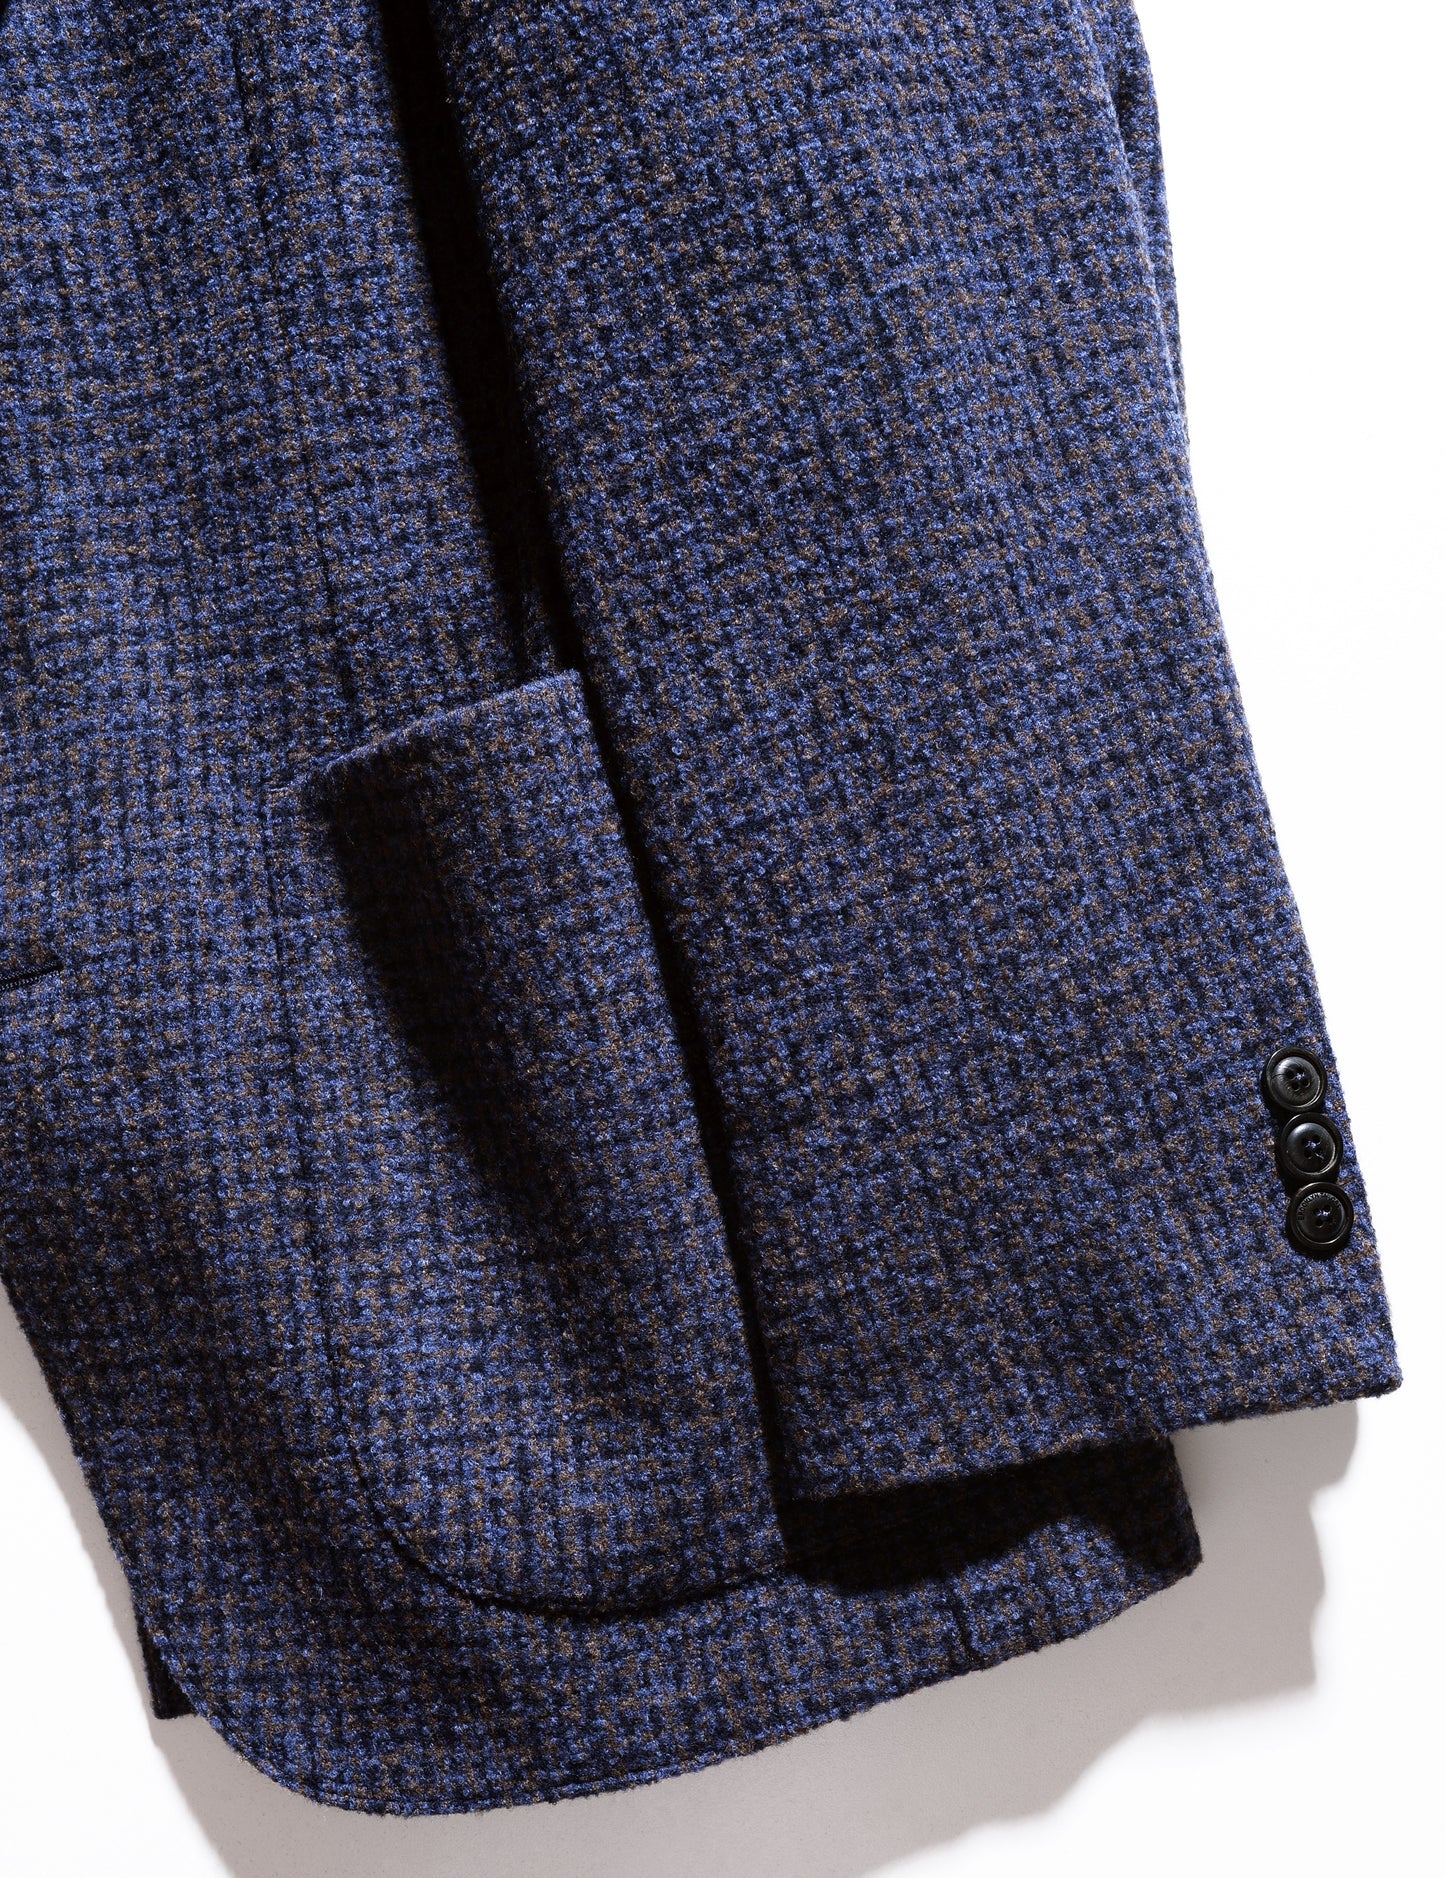 BKT35 Unstructured Jacket in 14.5 Micron Lofted Wool & Silk - Inverno Blue